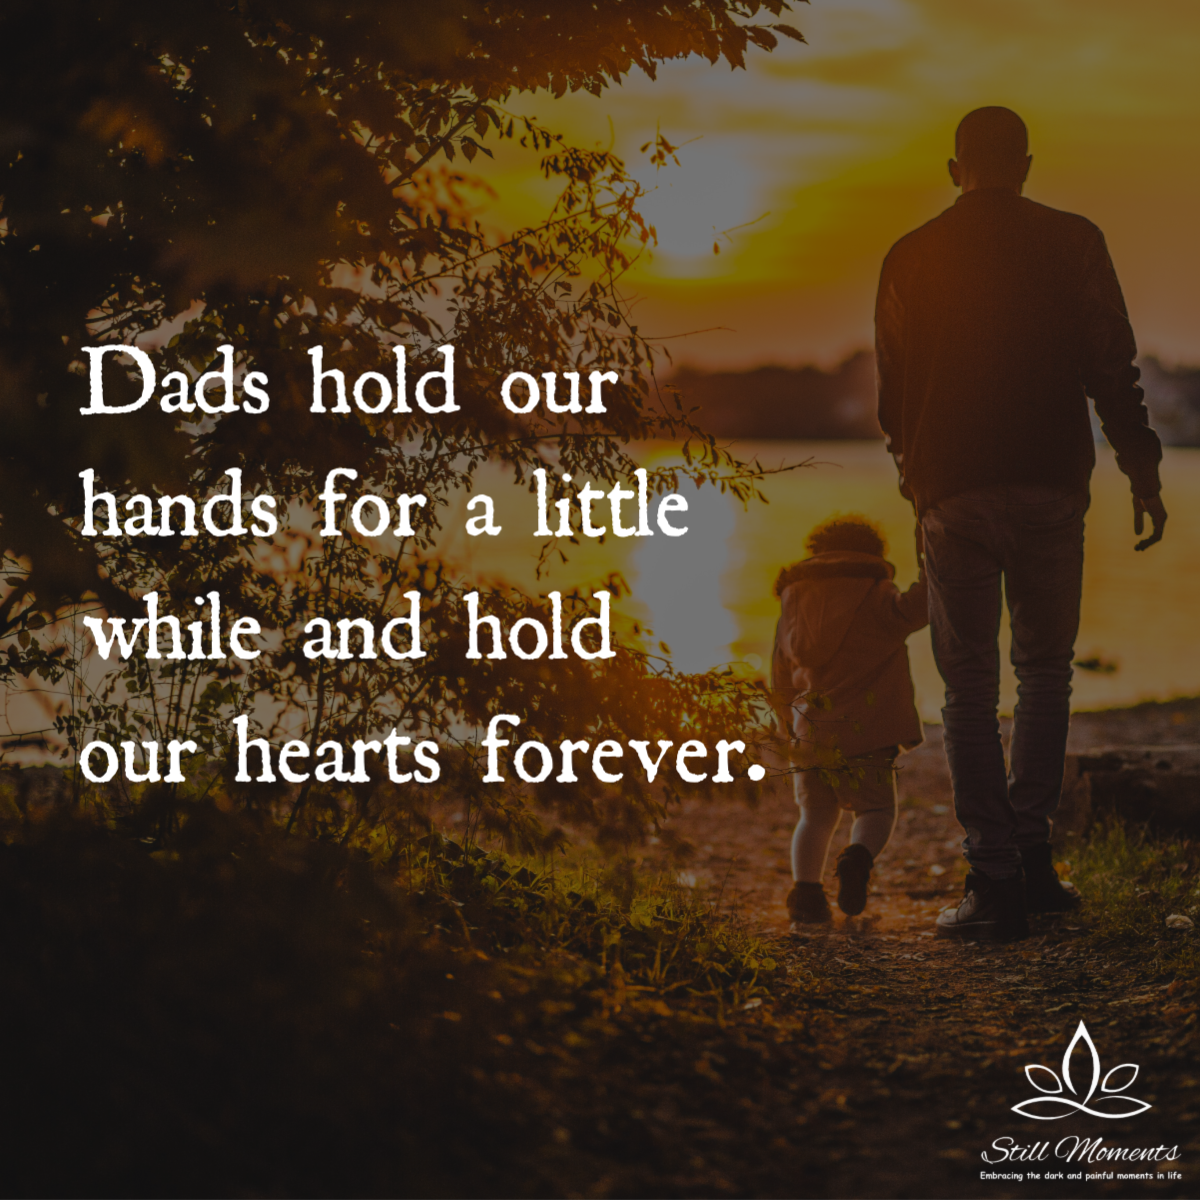 Father’s Day Quotes - Still Moments